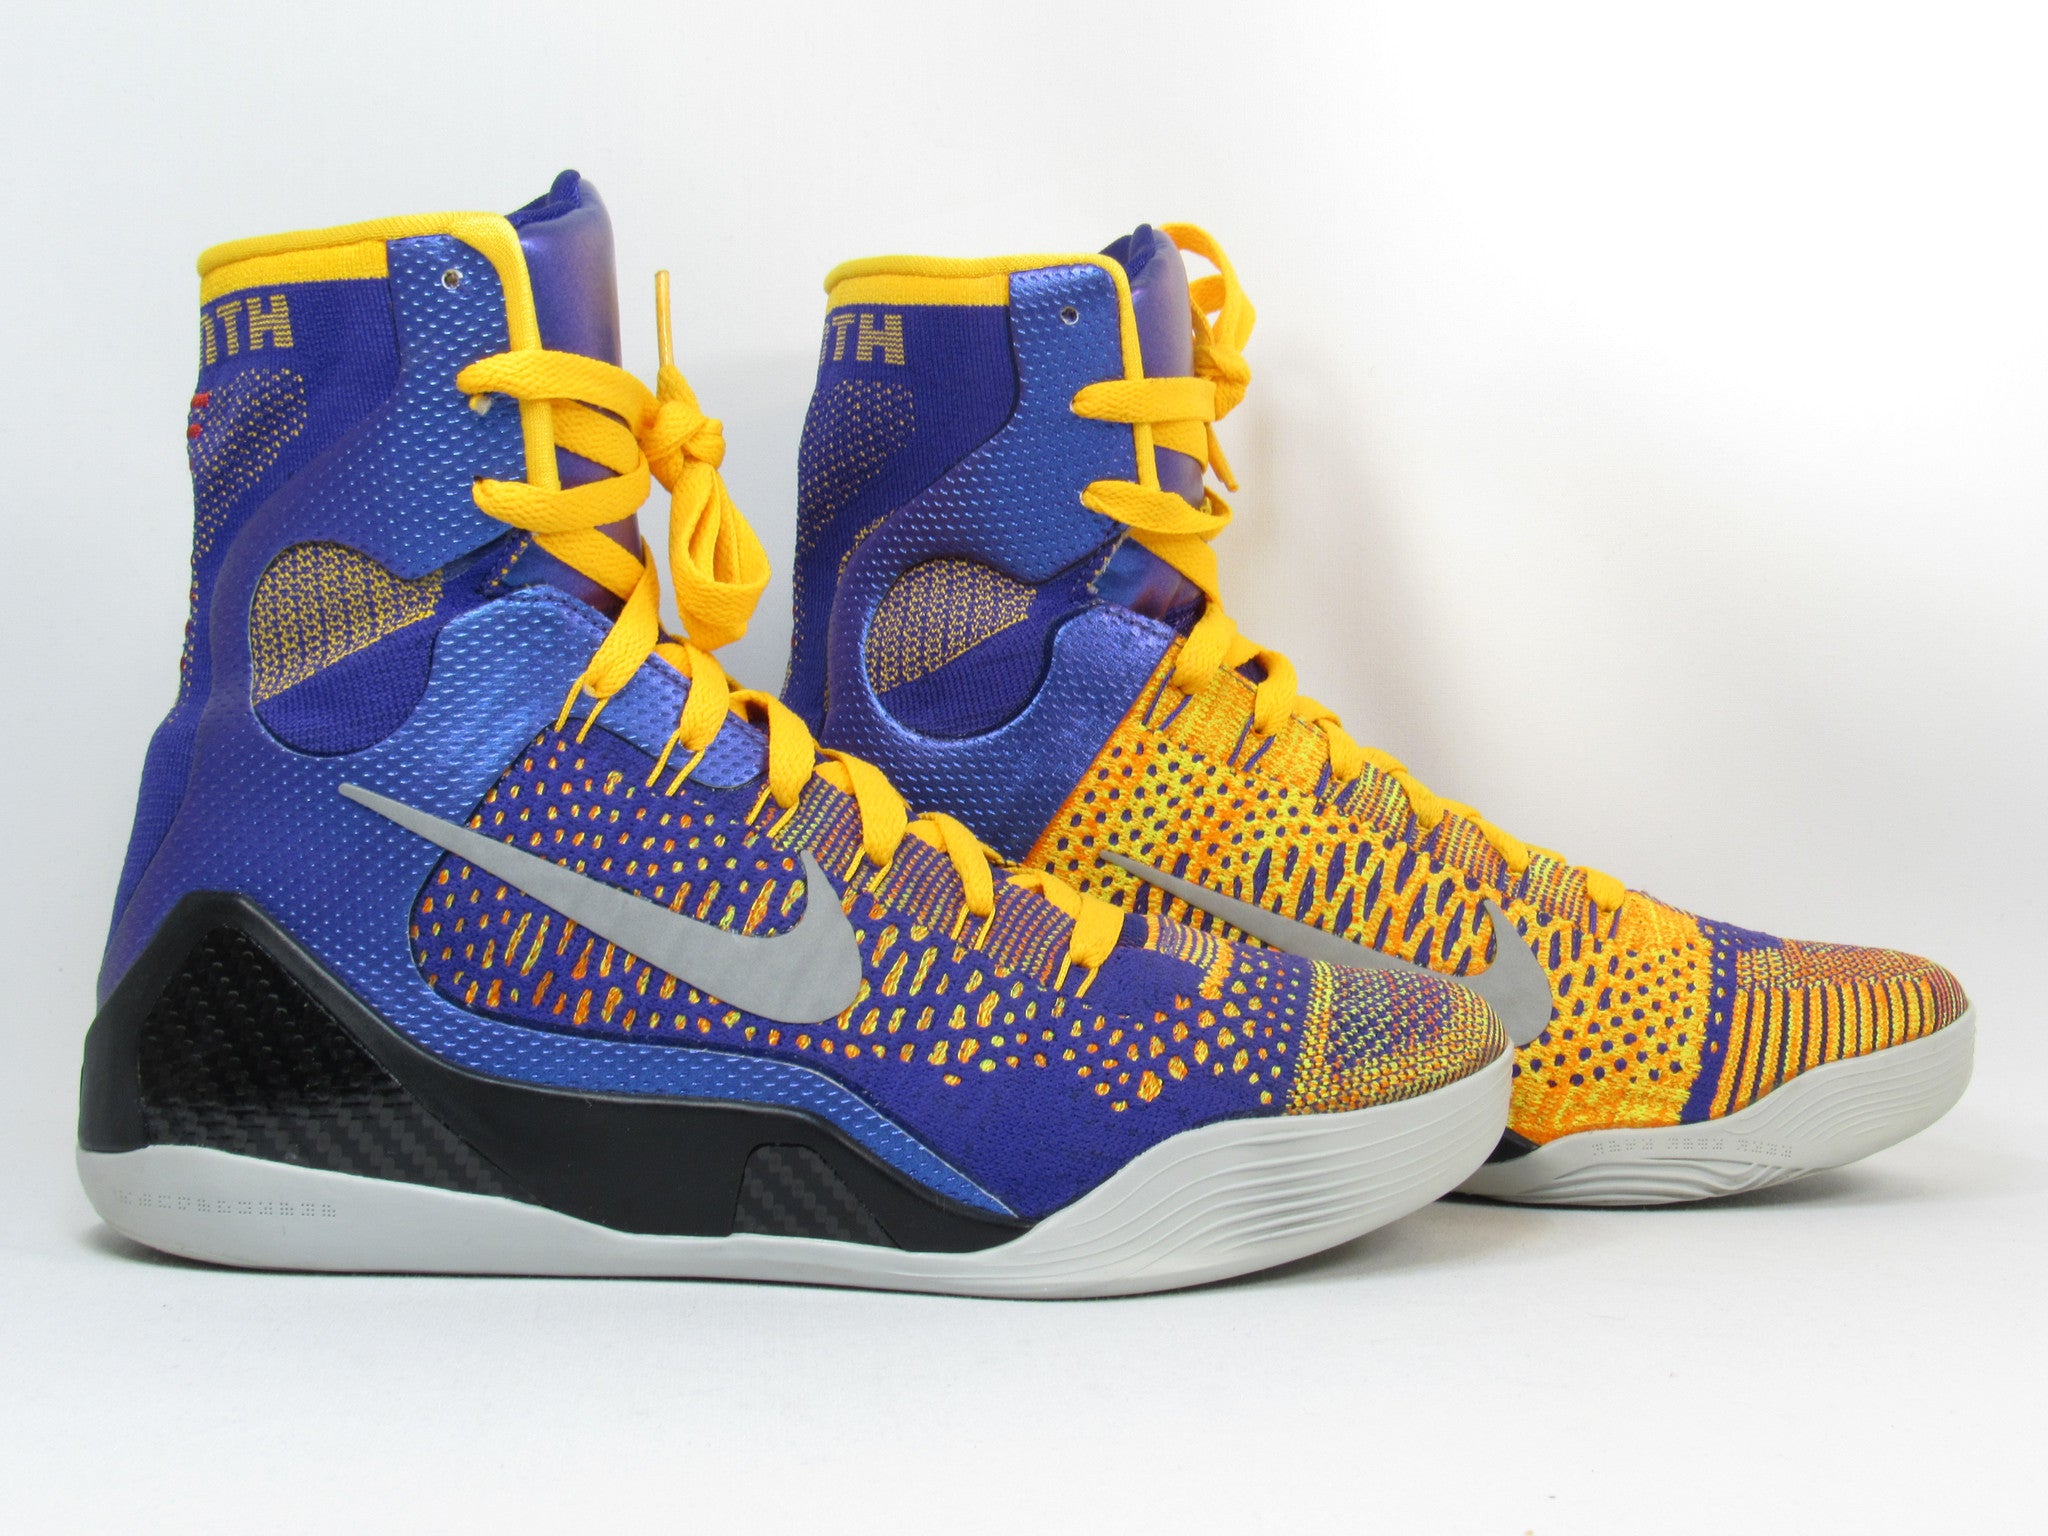 Nike Kobe 9 'Showtime' – The Sole Library